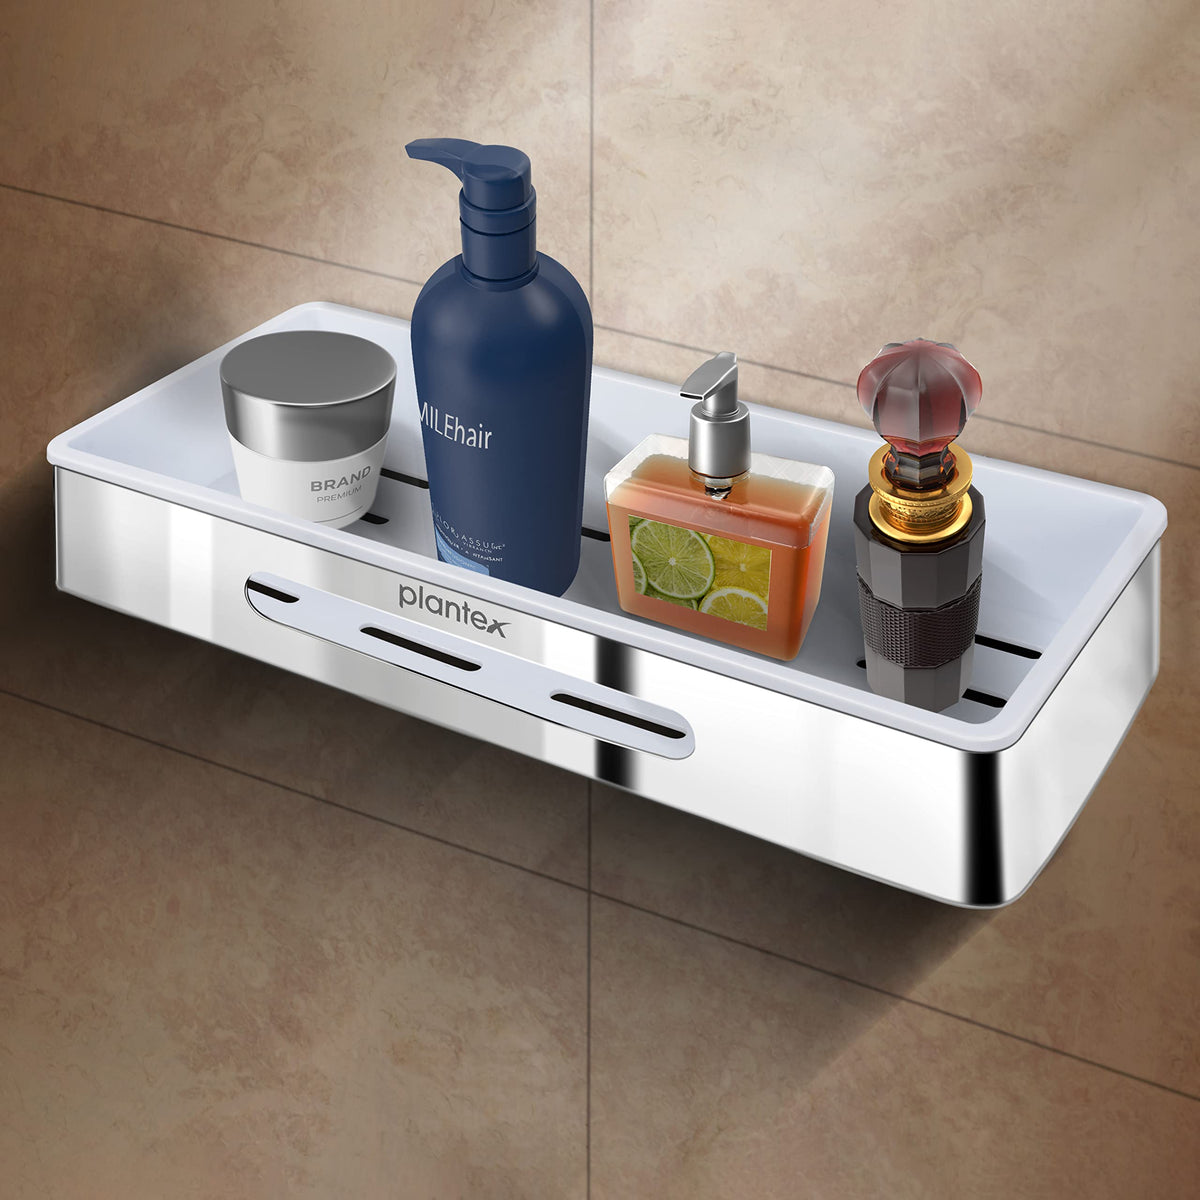 Plantex Stainless Steel & ABS Bathroom Shelf for Wall/Kitchen Shelf/Bathroom Shelf and Rack/Bathroom Accessories - (14X5 Inches)